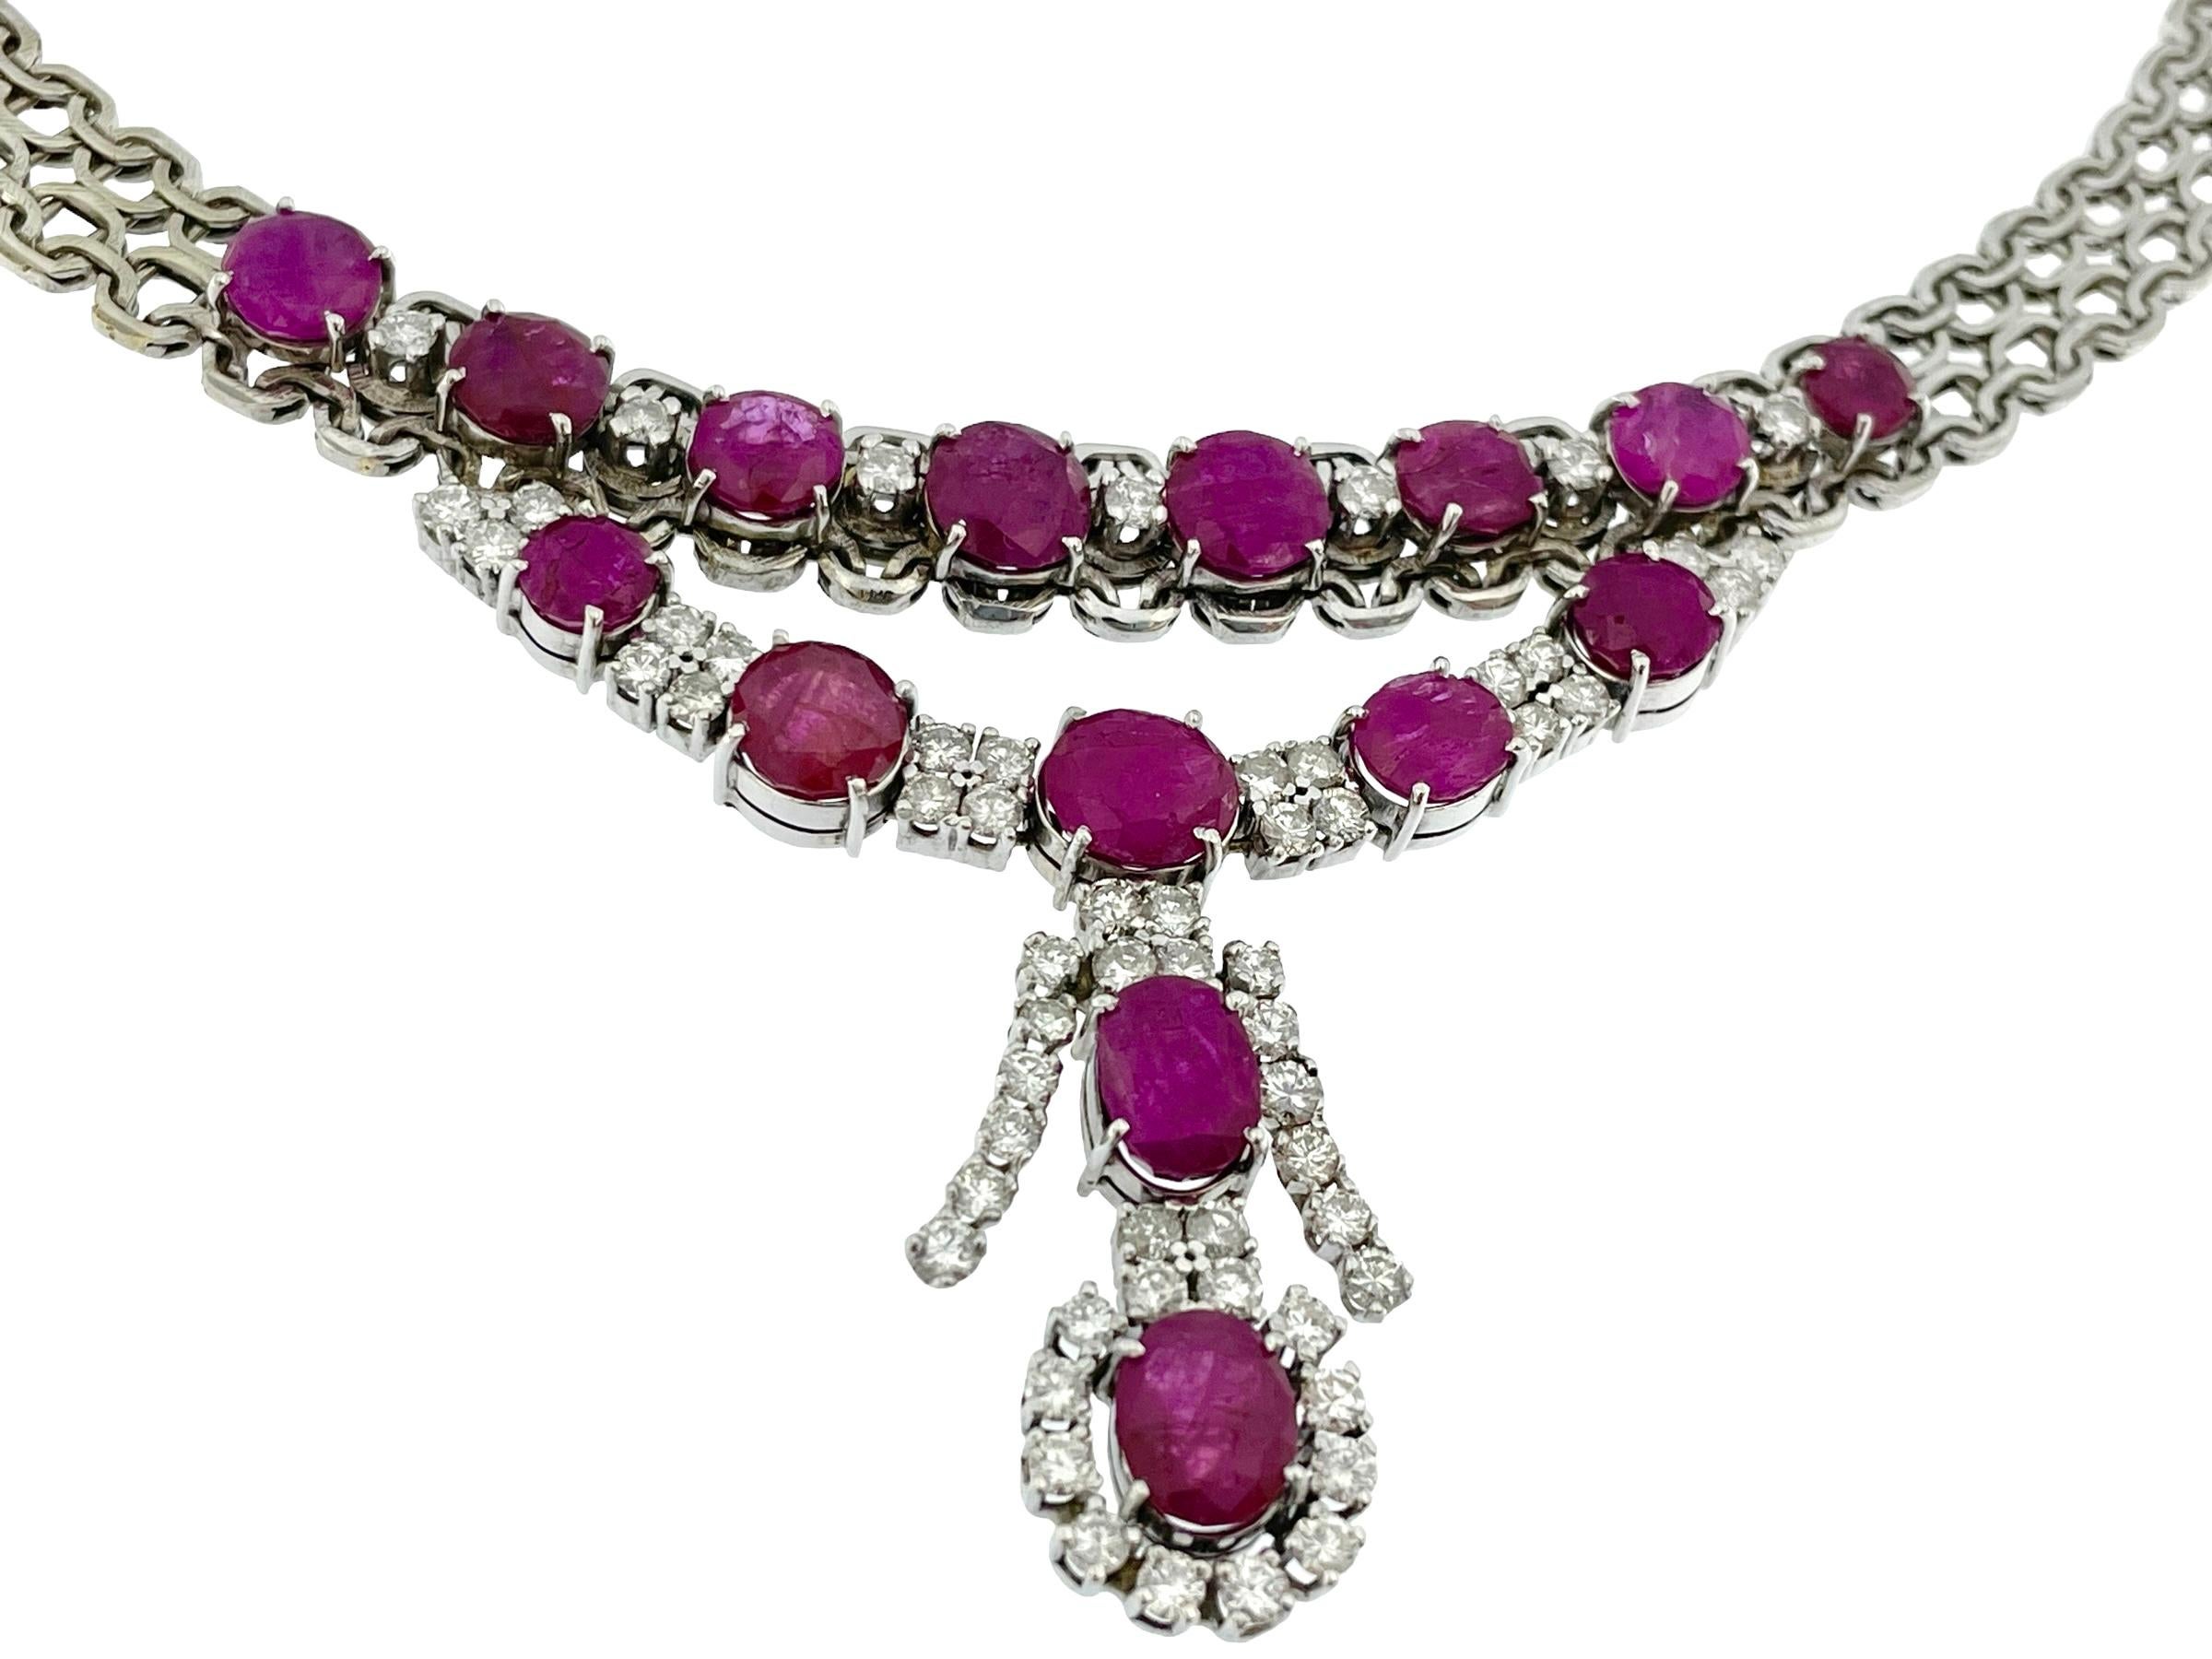 IGI Certified White Gold Diamonds and Rubies Necklace For Sale 1